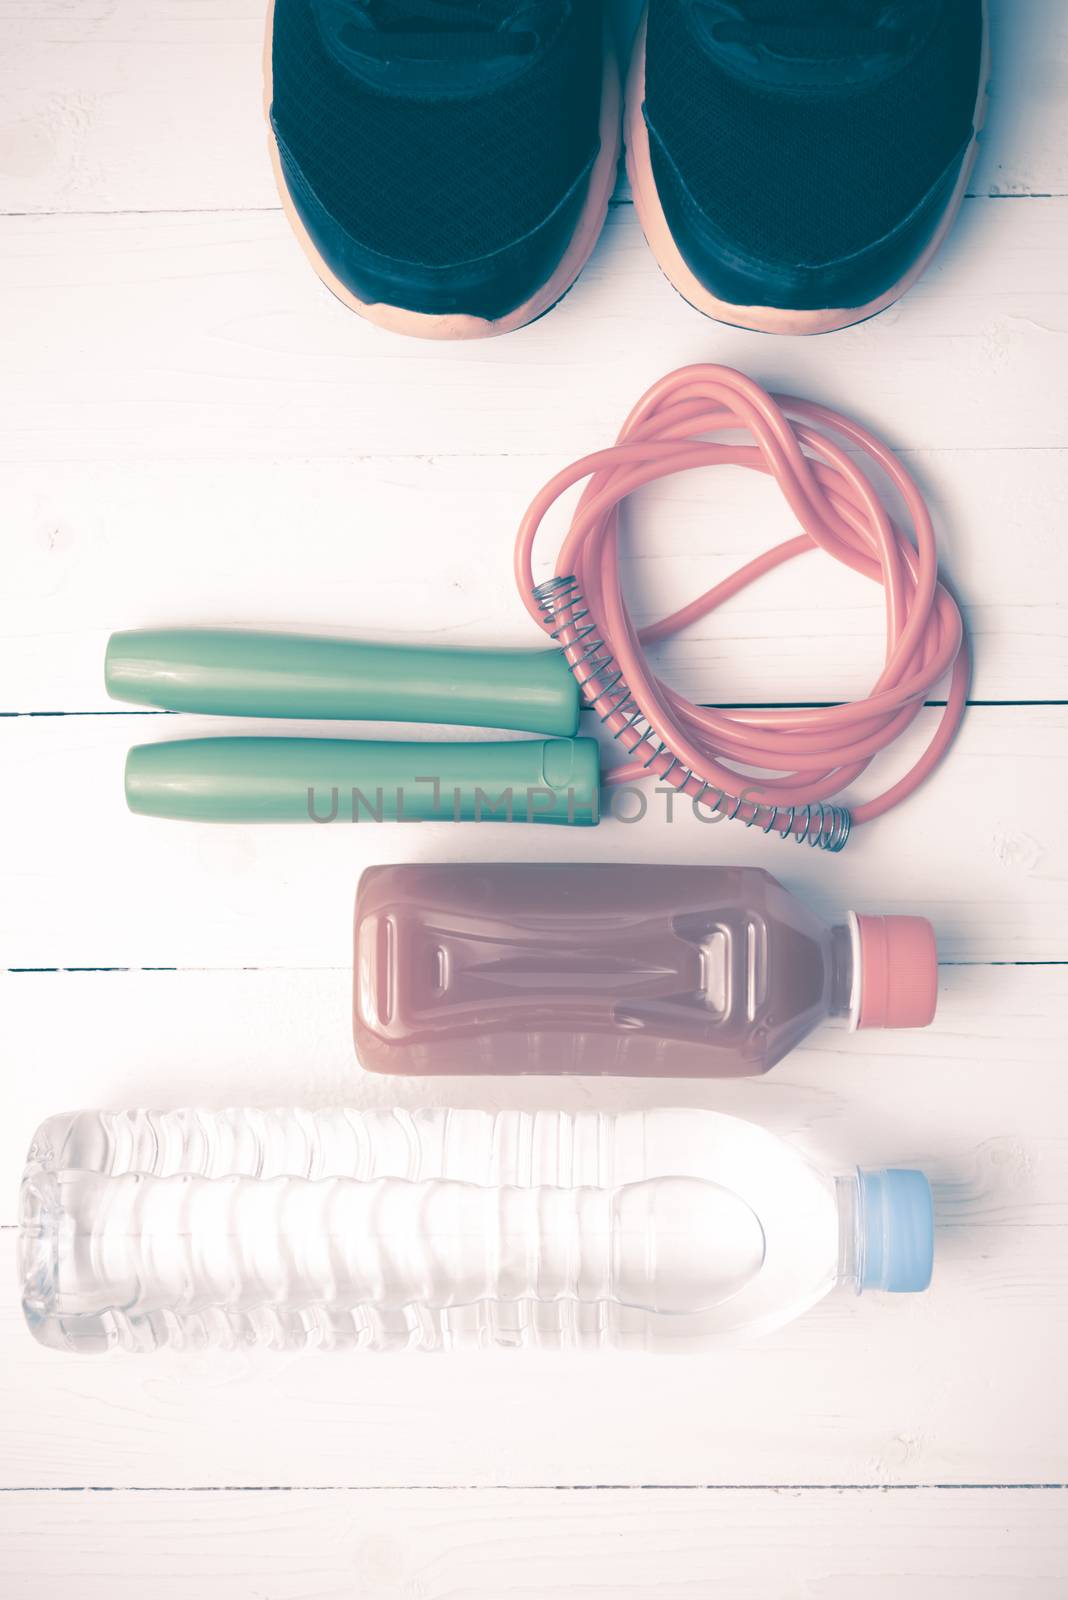 fitness equipment : running shoes,jumping rope,drinking water and orange juice on white wood background vintage tone style